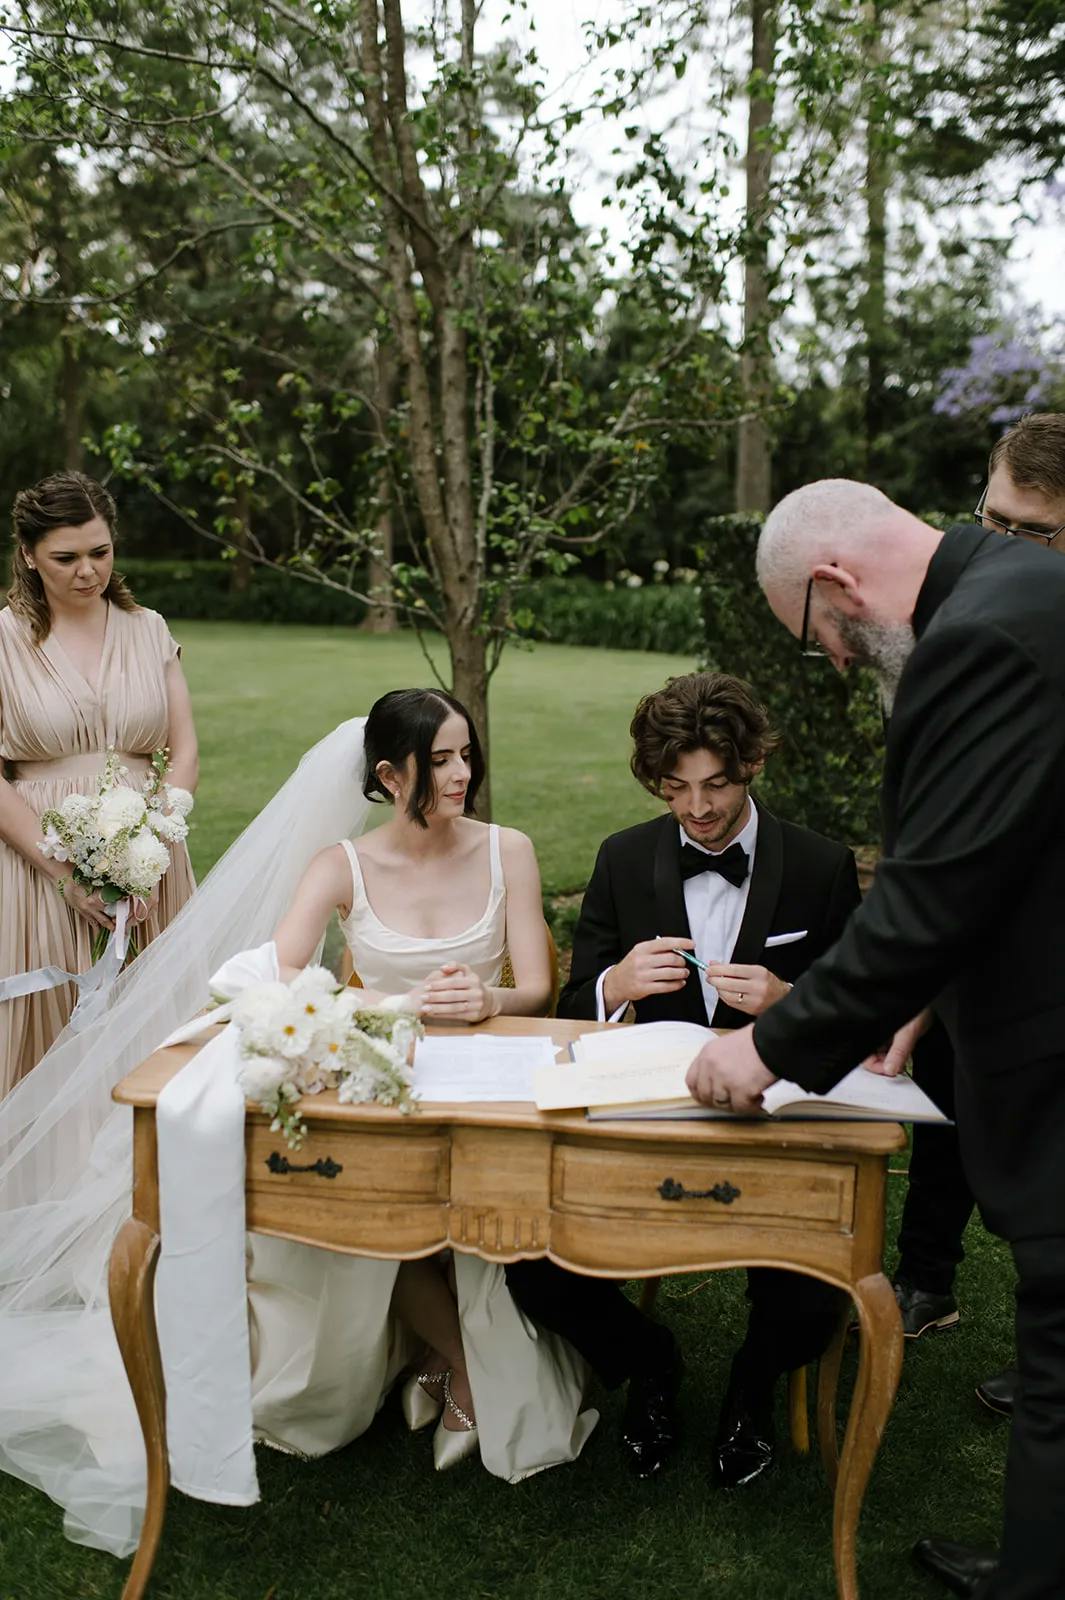 A wedding ceremony outdoors with a bride in a white dress and veil sitting at a wooden table, and a groom in a black suit sitting next to her. A bearded man is officiating. A bridesmaid in a beige dress stands holding flowers. Trees and greenery are in the background.